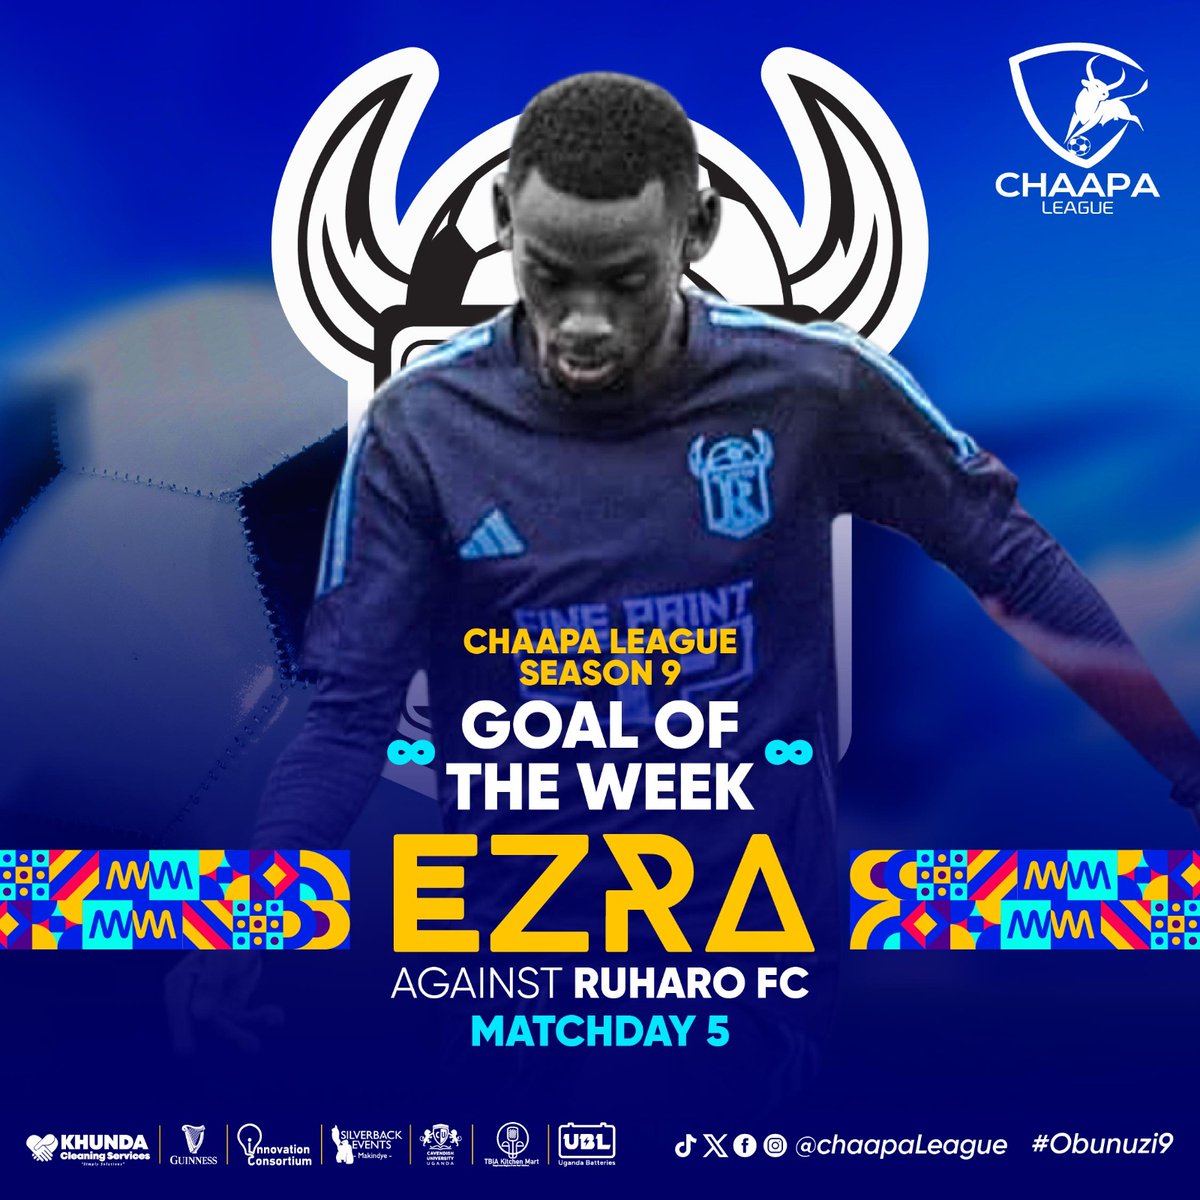 He is Impala and he stole in to guide the ball to the net in the most acrobatic style against his mother team. @EzraKevin113552 #Chaapaleague9